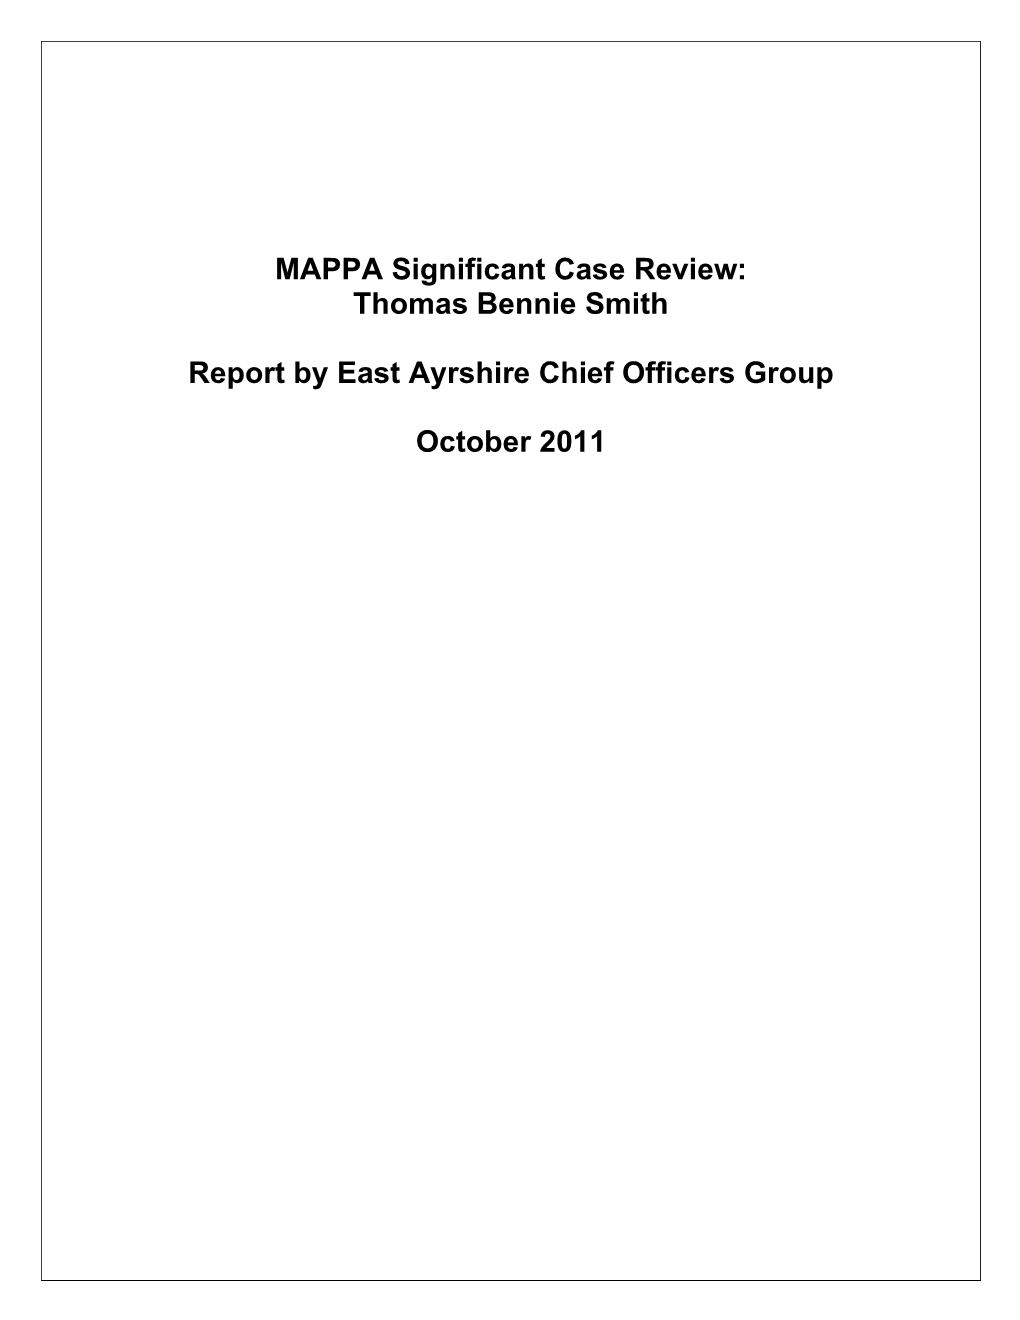 MAPPA Significant Case Review Thomas Bennie Smith